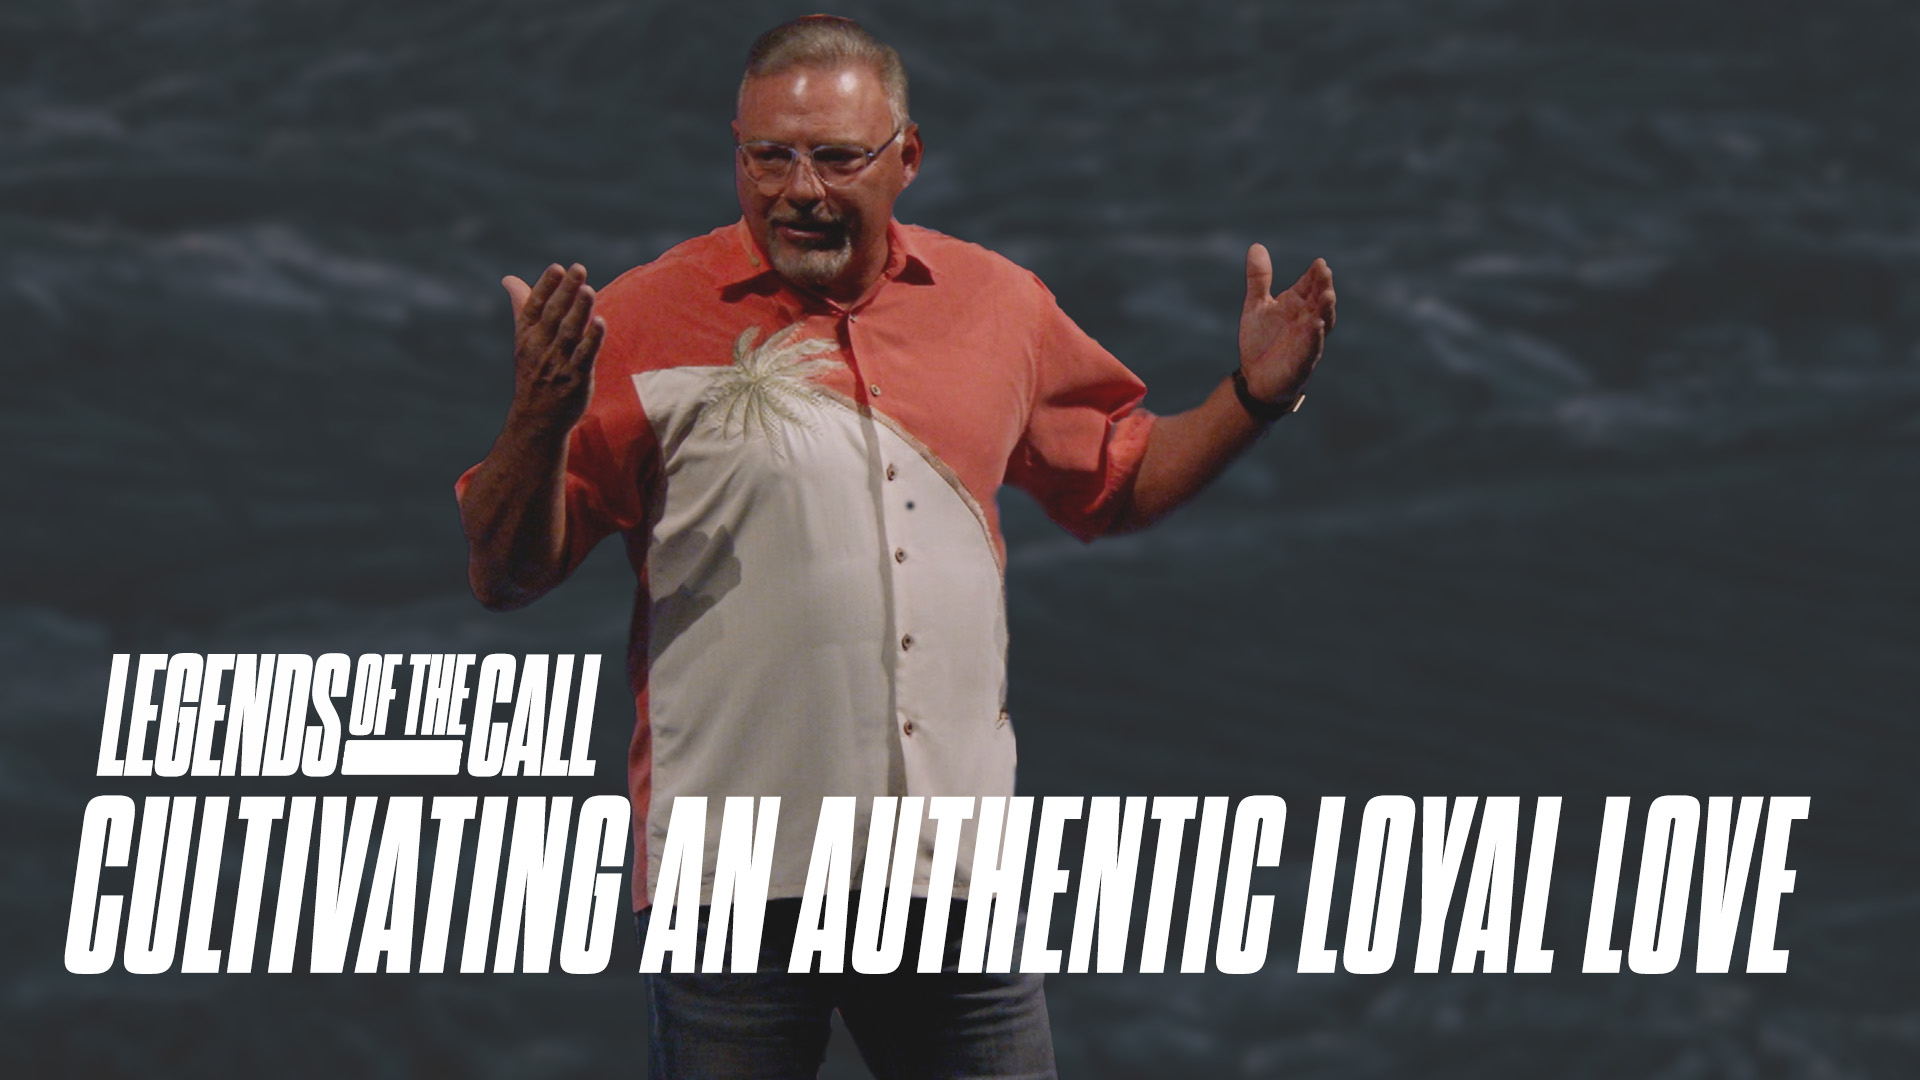 Cultivating an Authentic Loyal Love